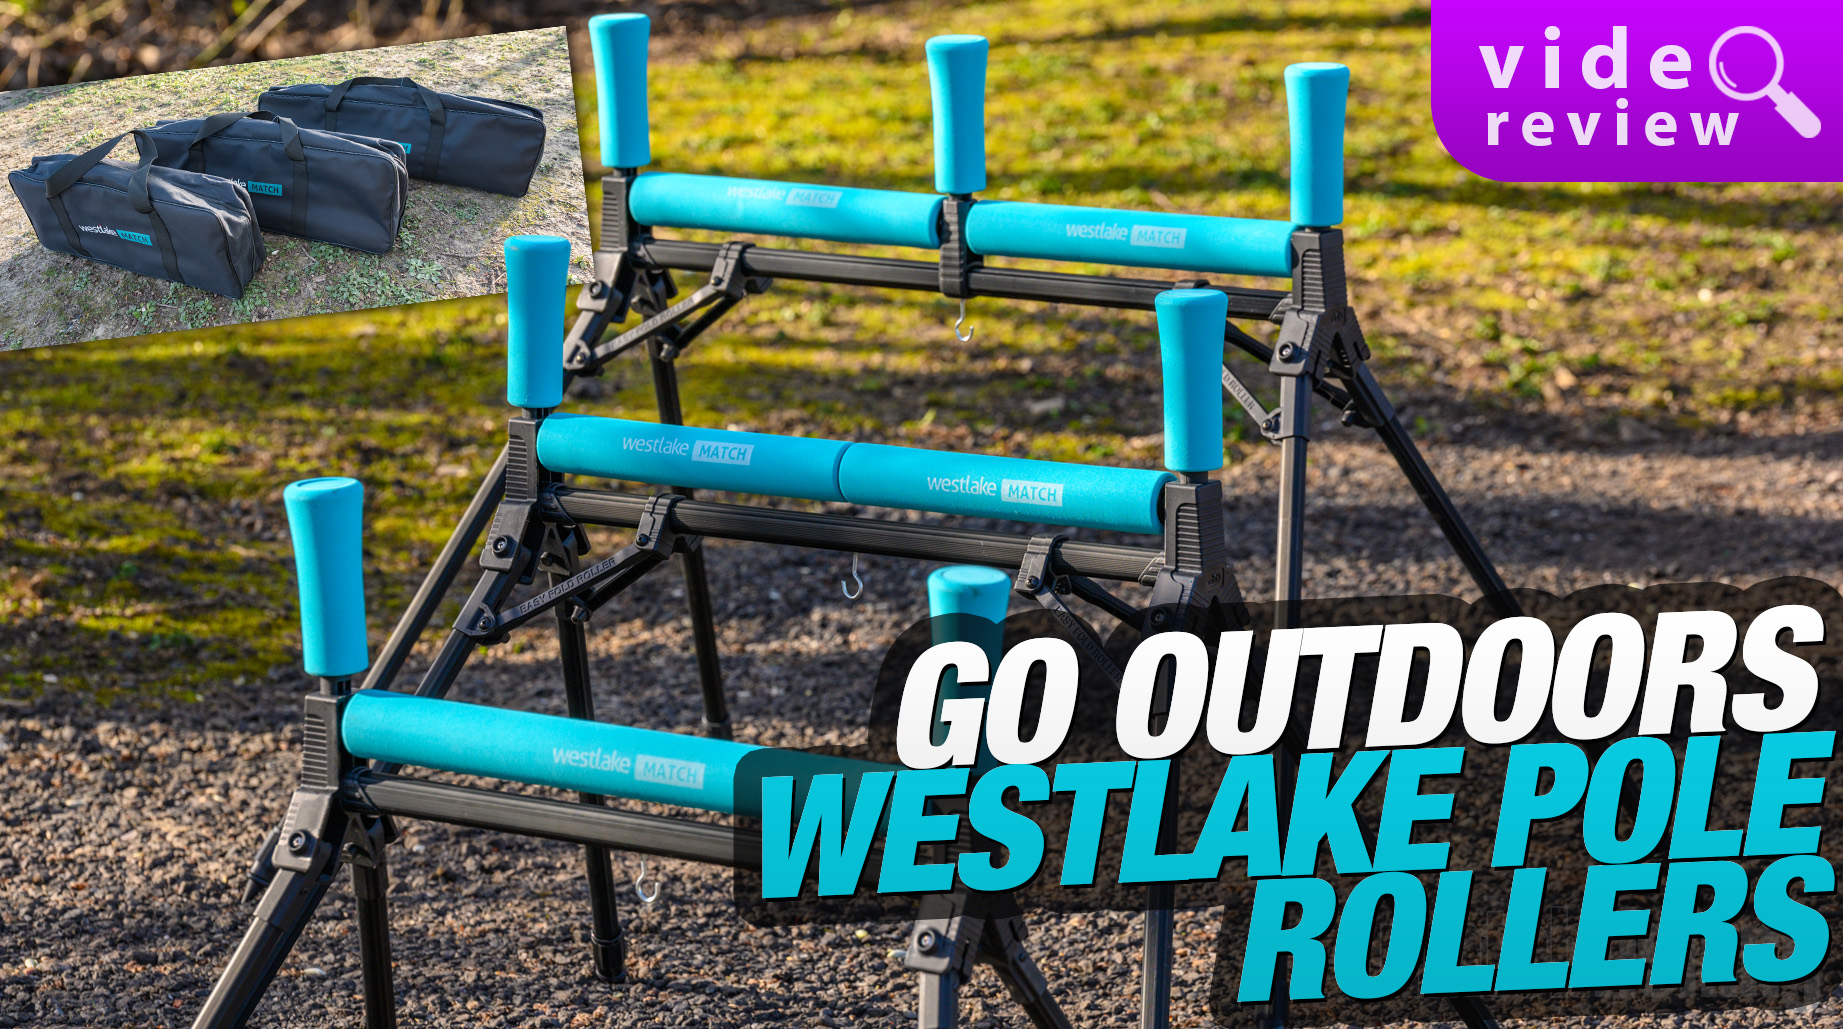 Review: Westlake Pole Rollers (Video)